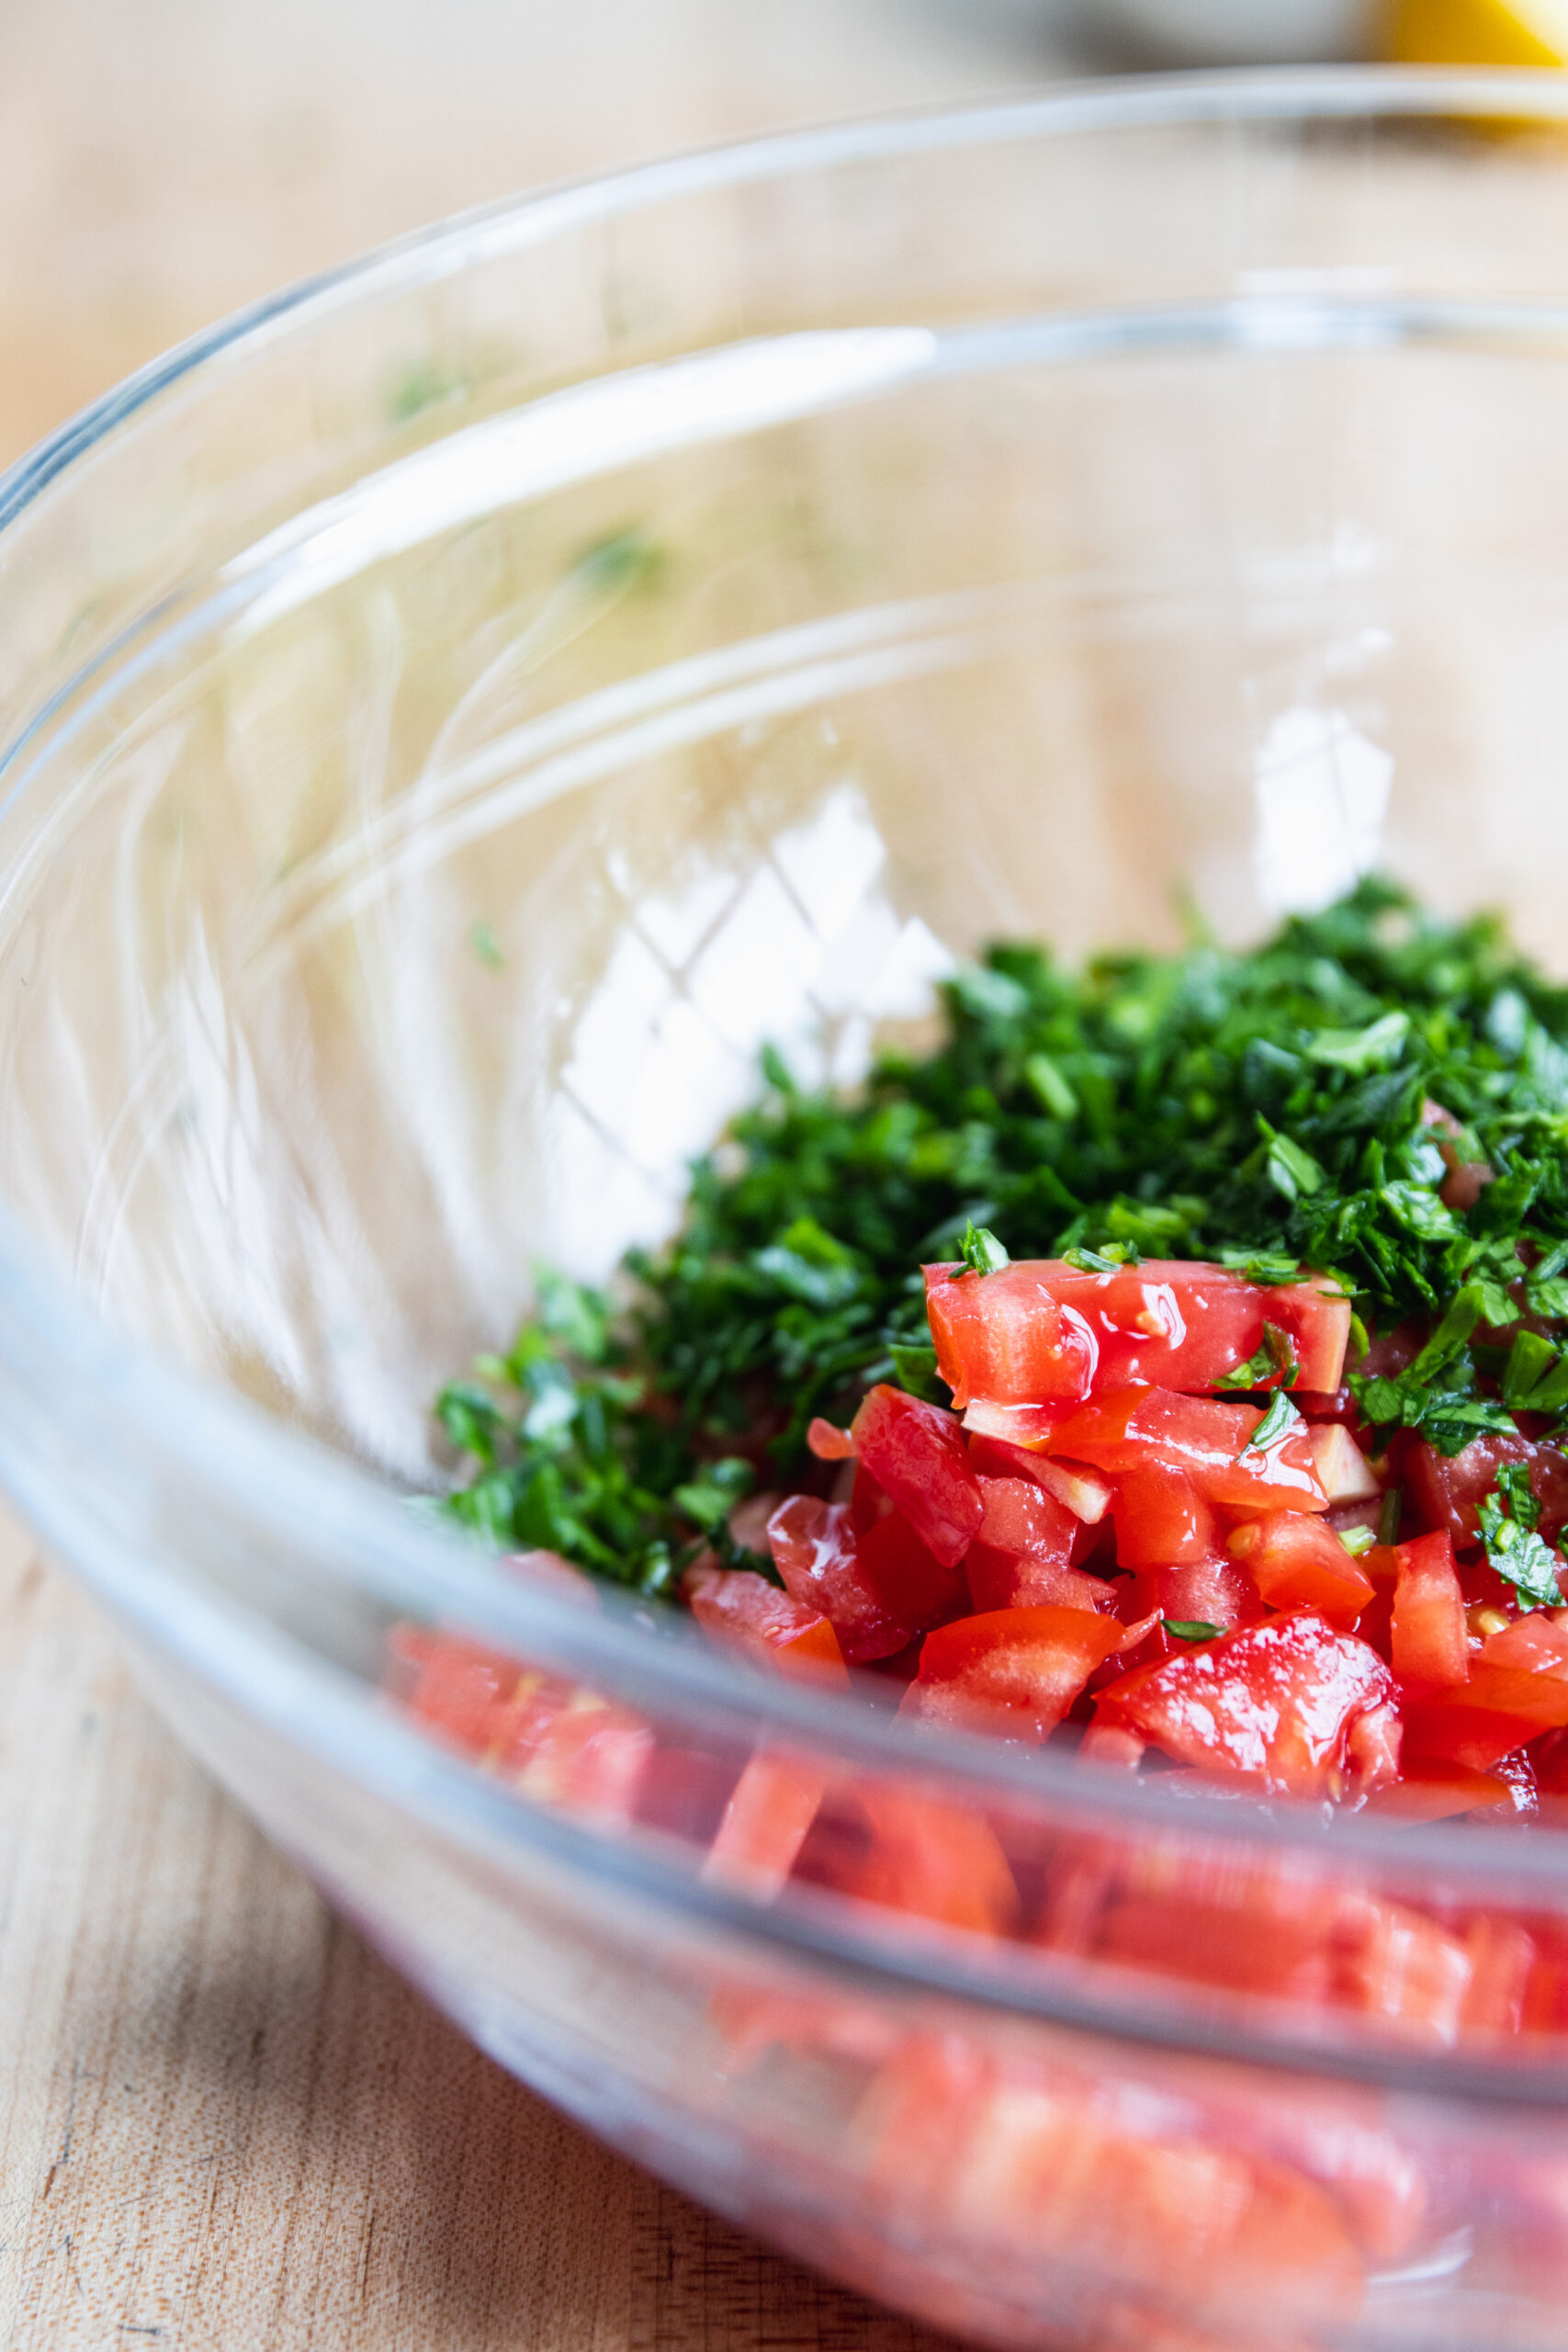 Chopped Tomato and Parsley